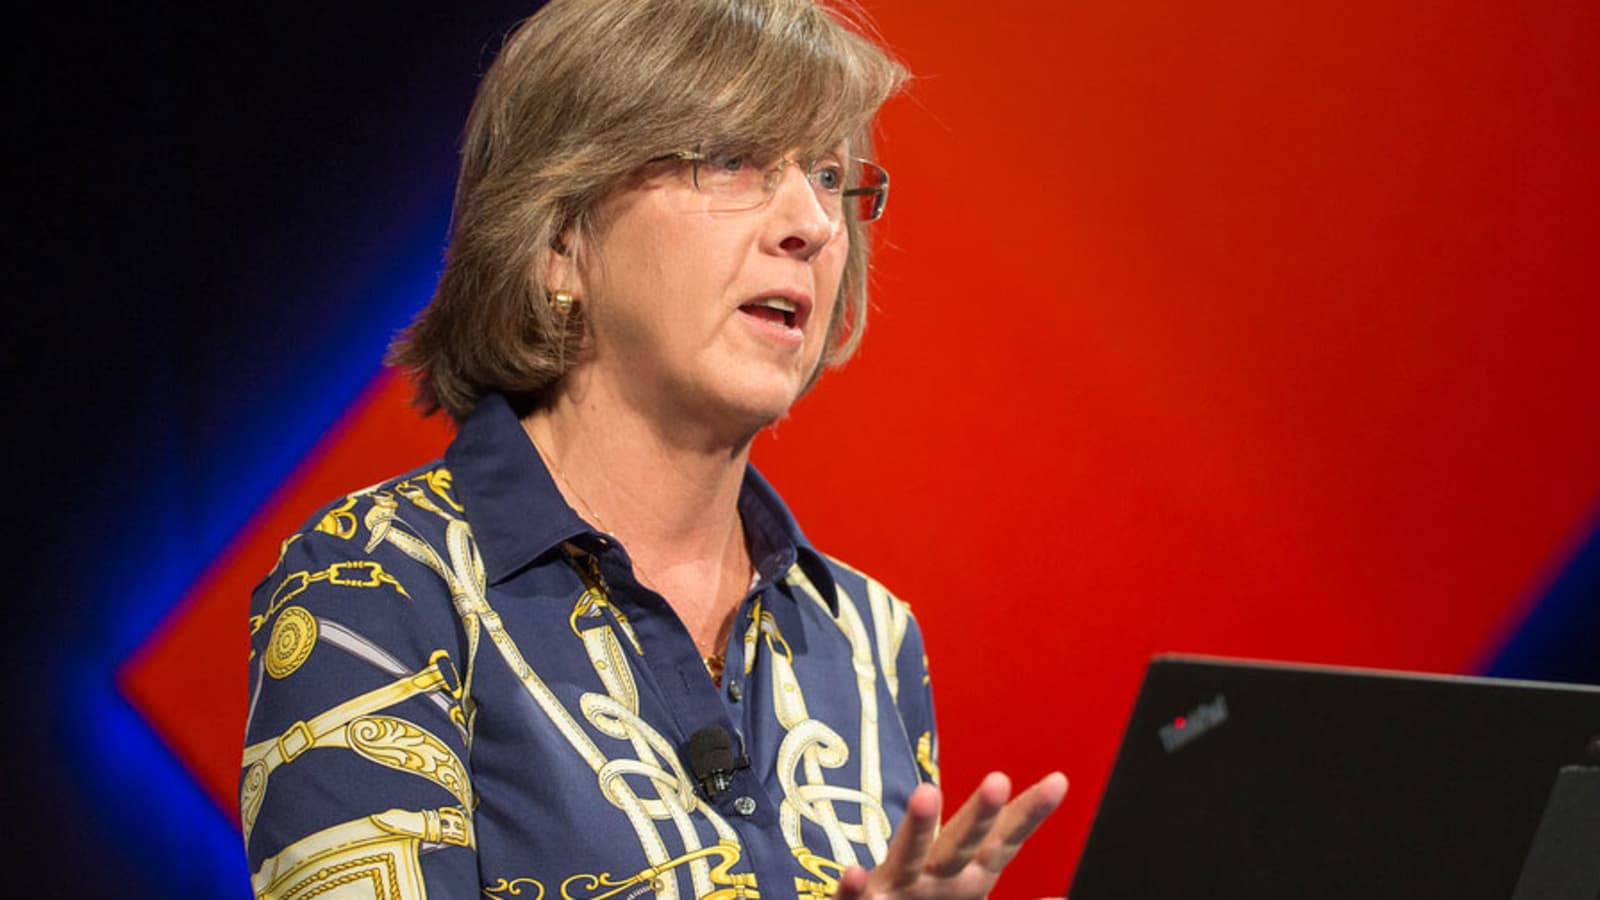 What Mary Meeker thinks about venture capital